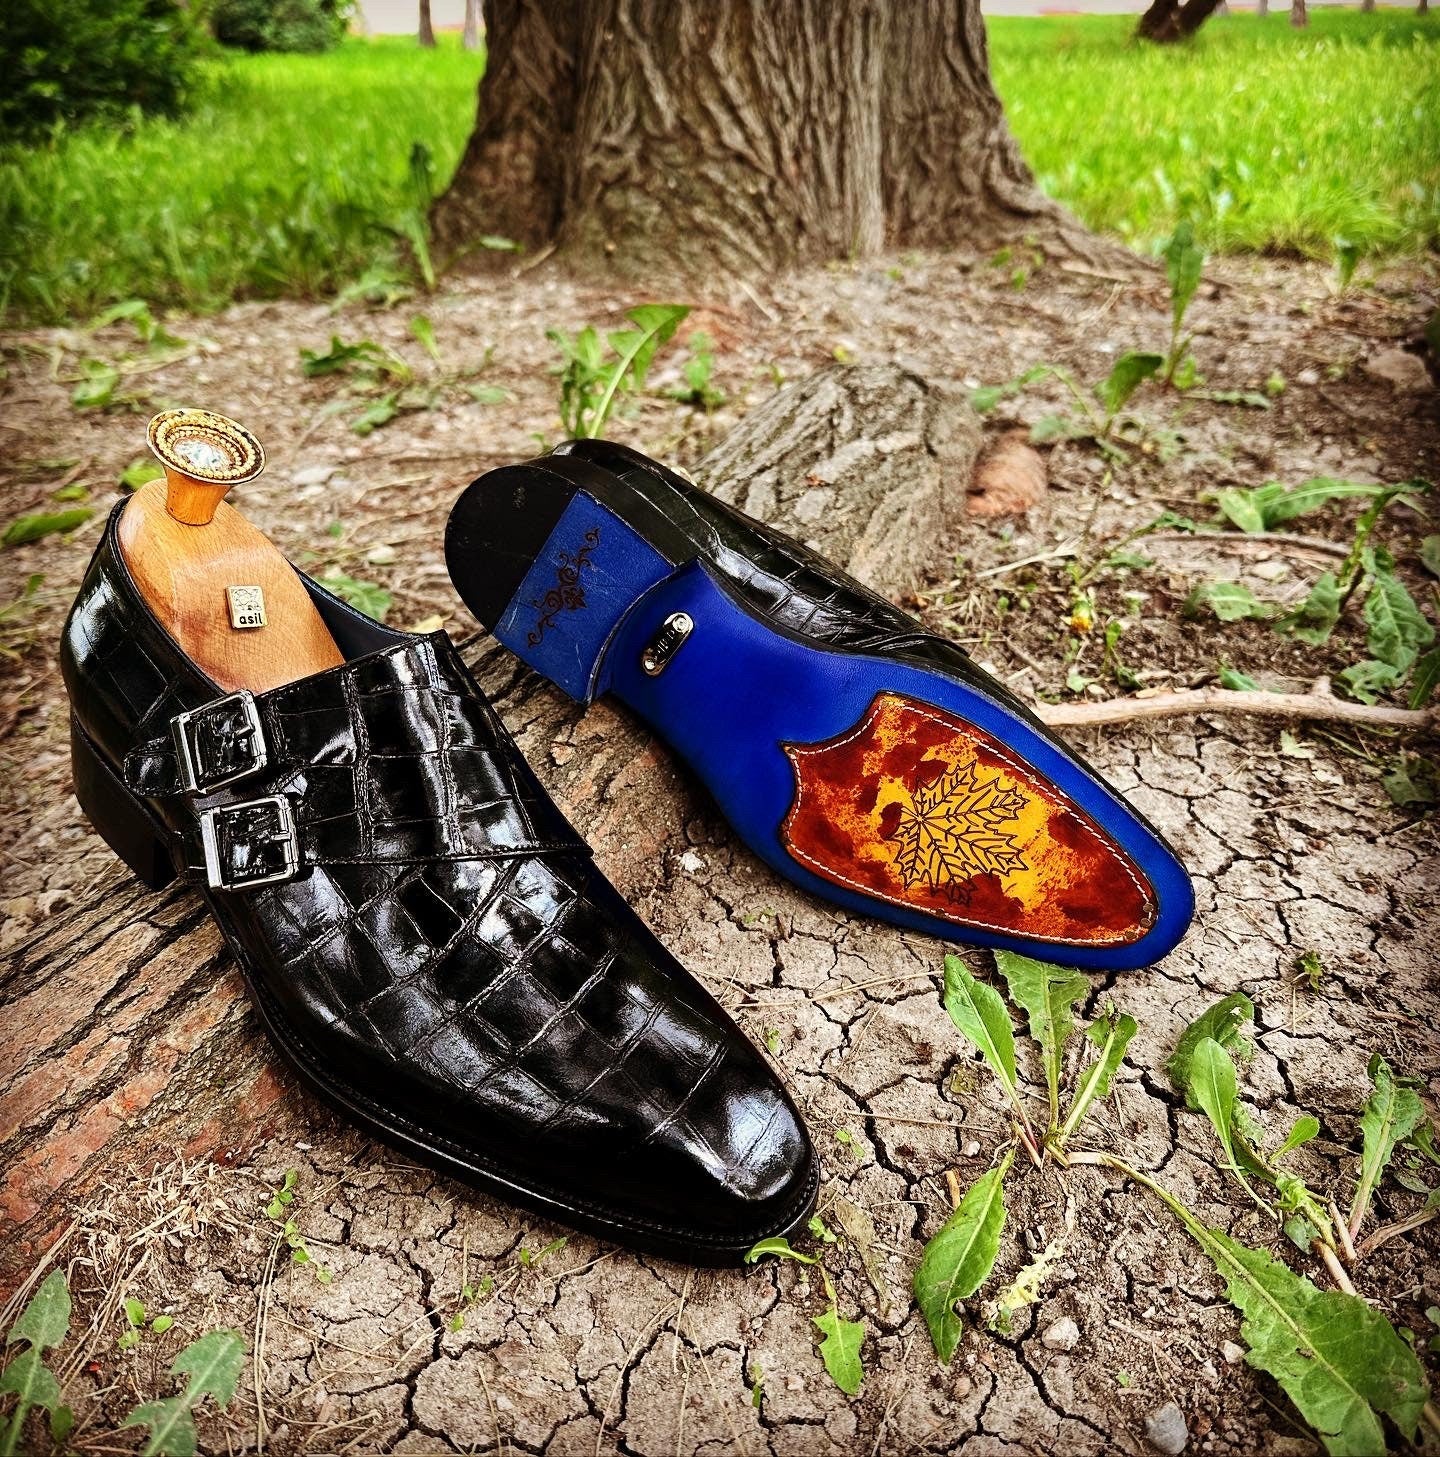 Black Croco Leather Monk Strap Dress Shoes Leather Sole Alligator Print Made-To-Order Bespoke Shoes